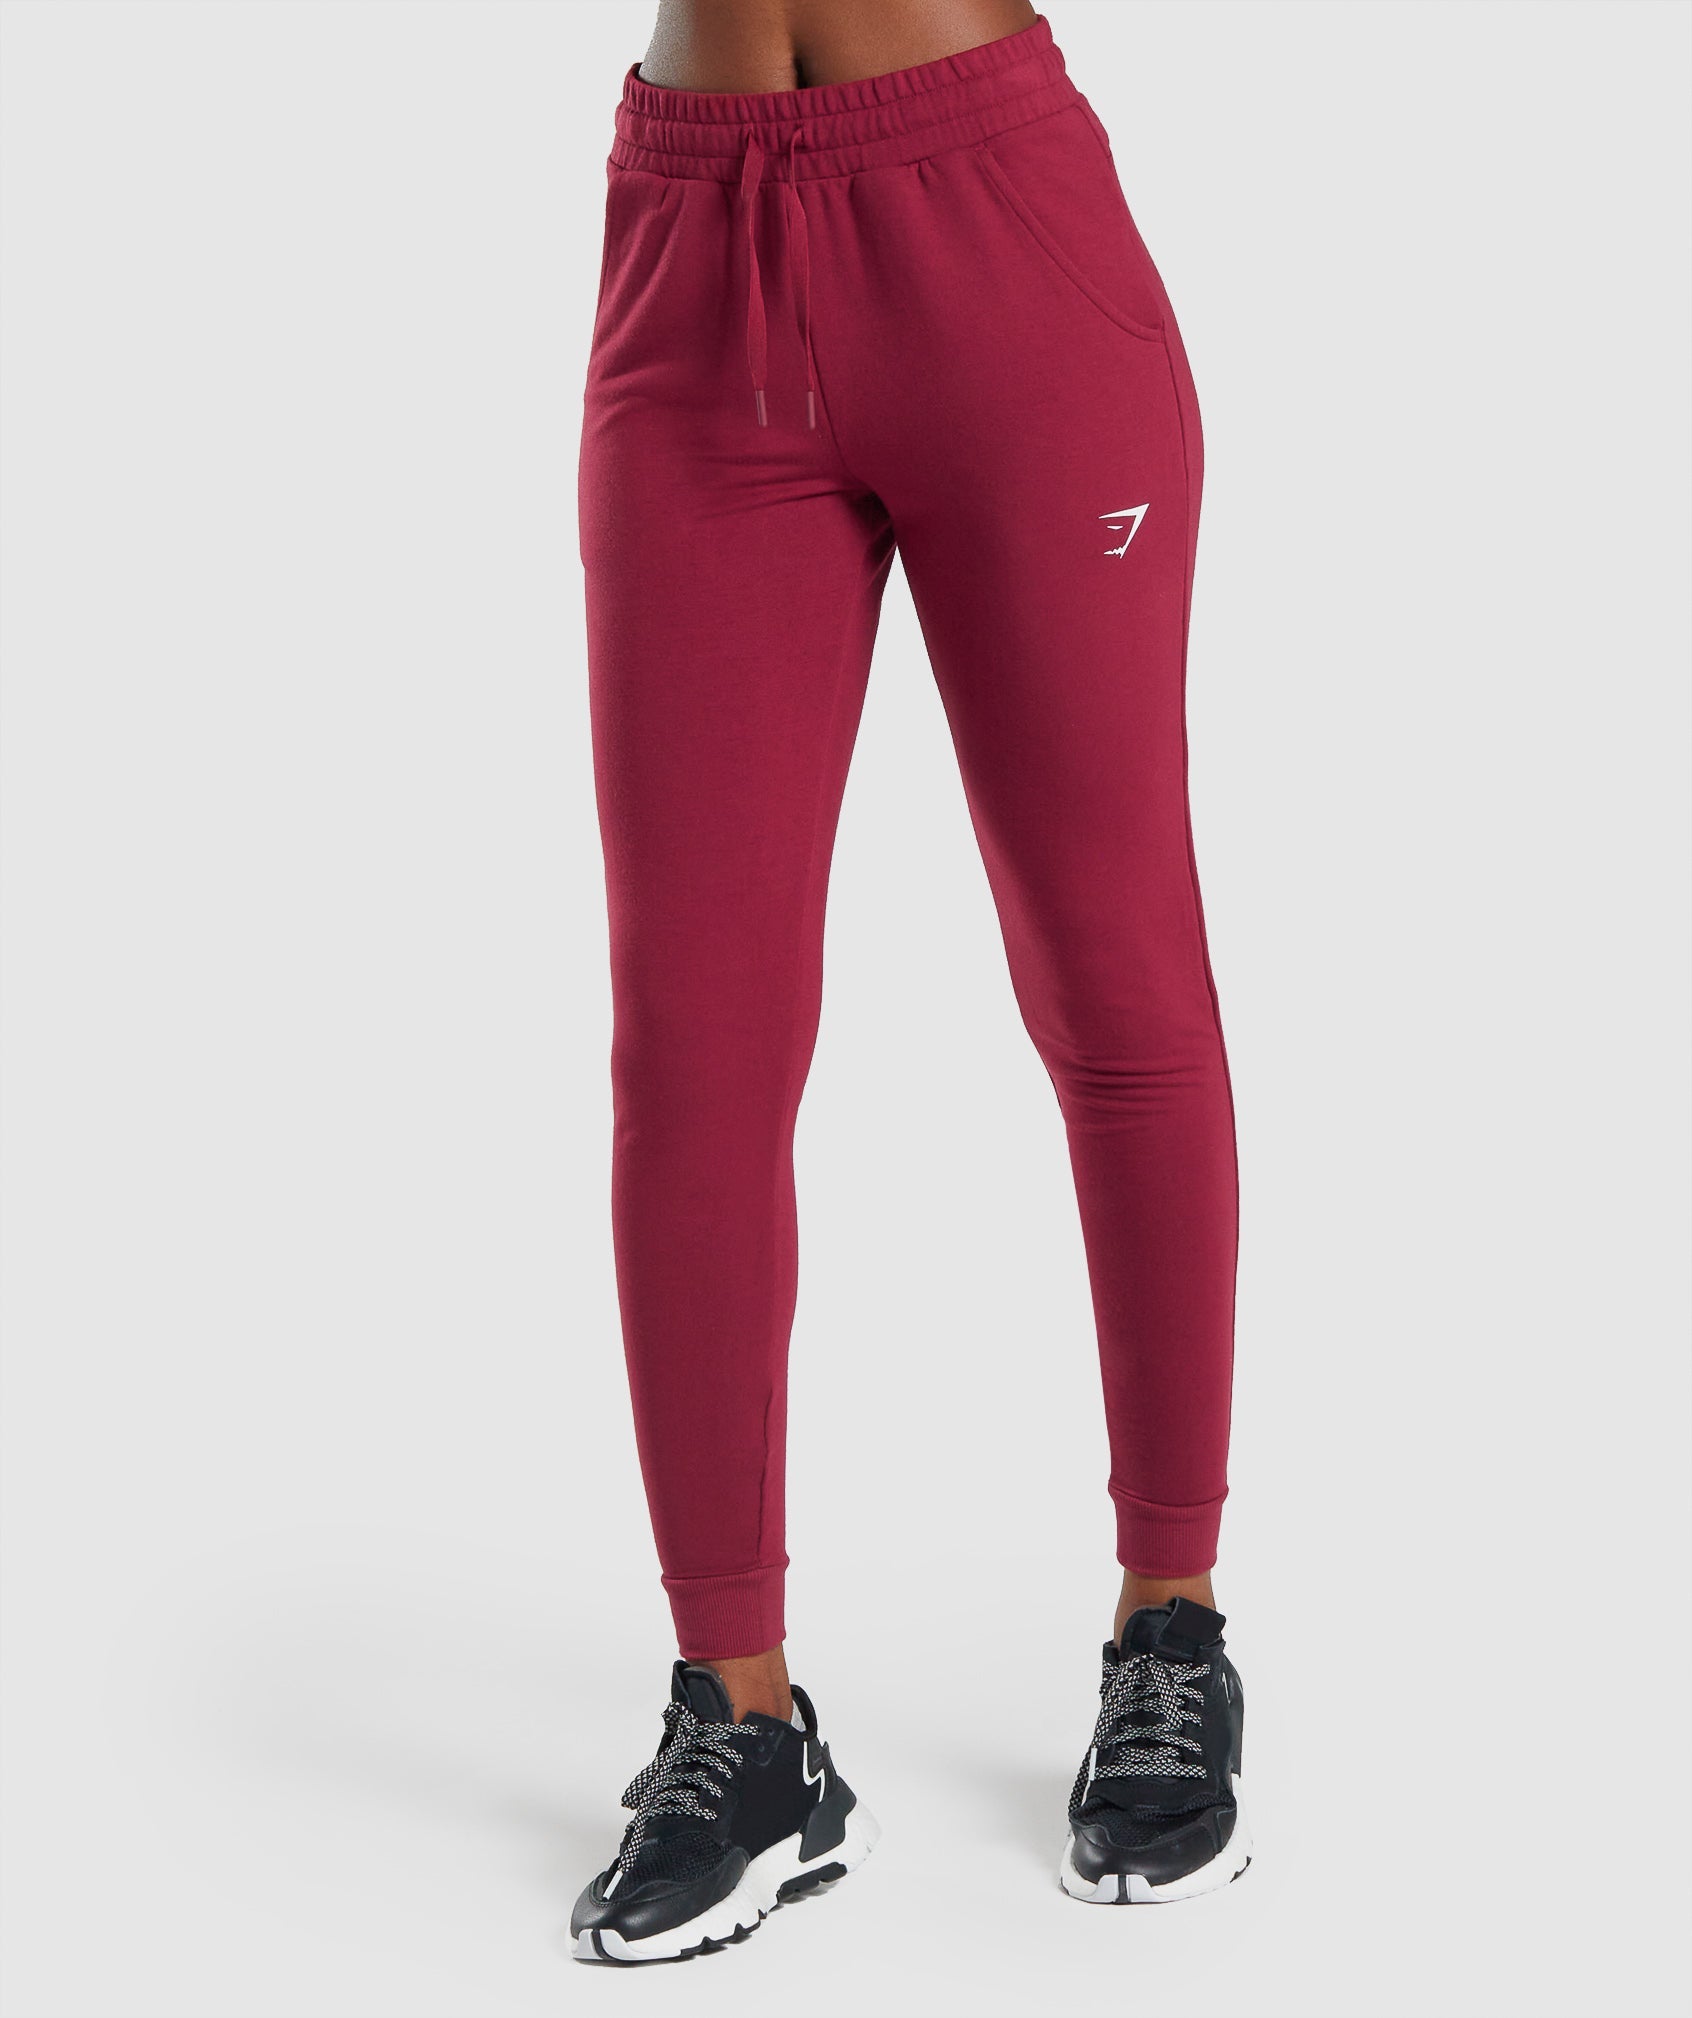 Gymshark Pippa Training Joggers in Mauve Size S